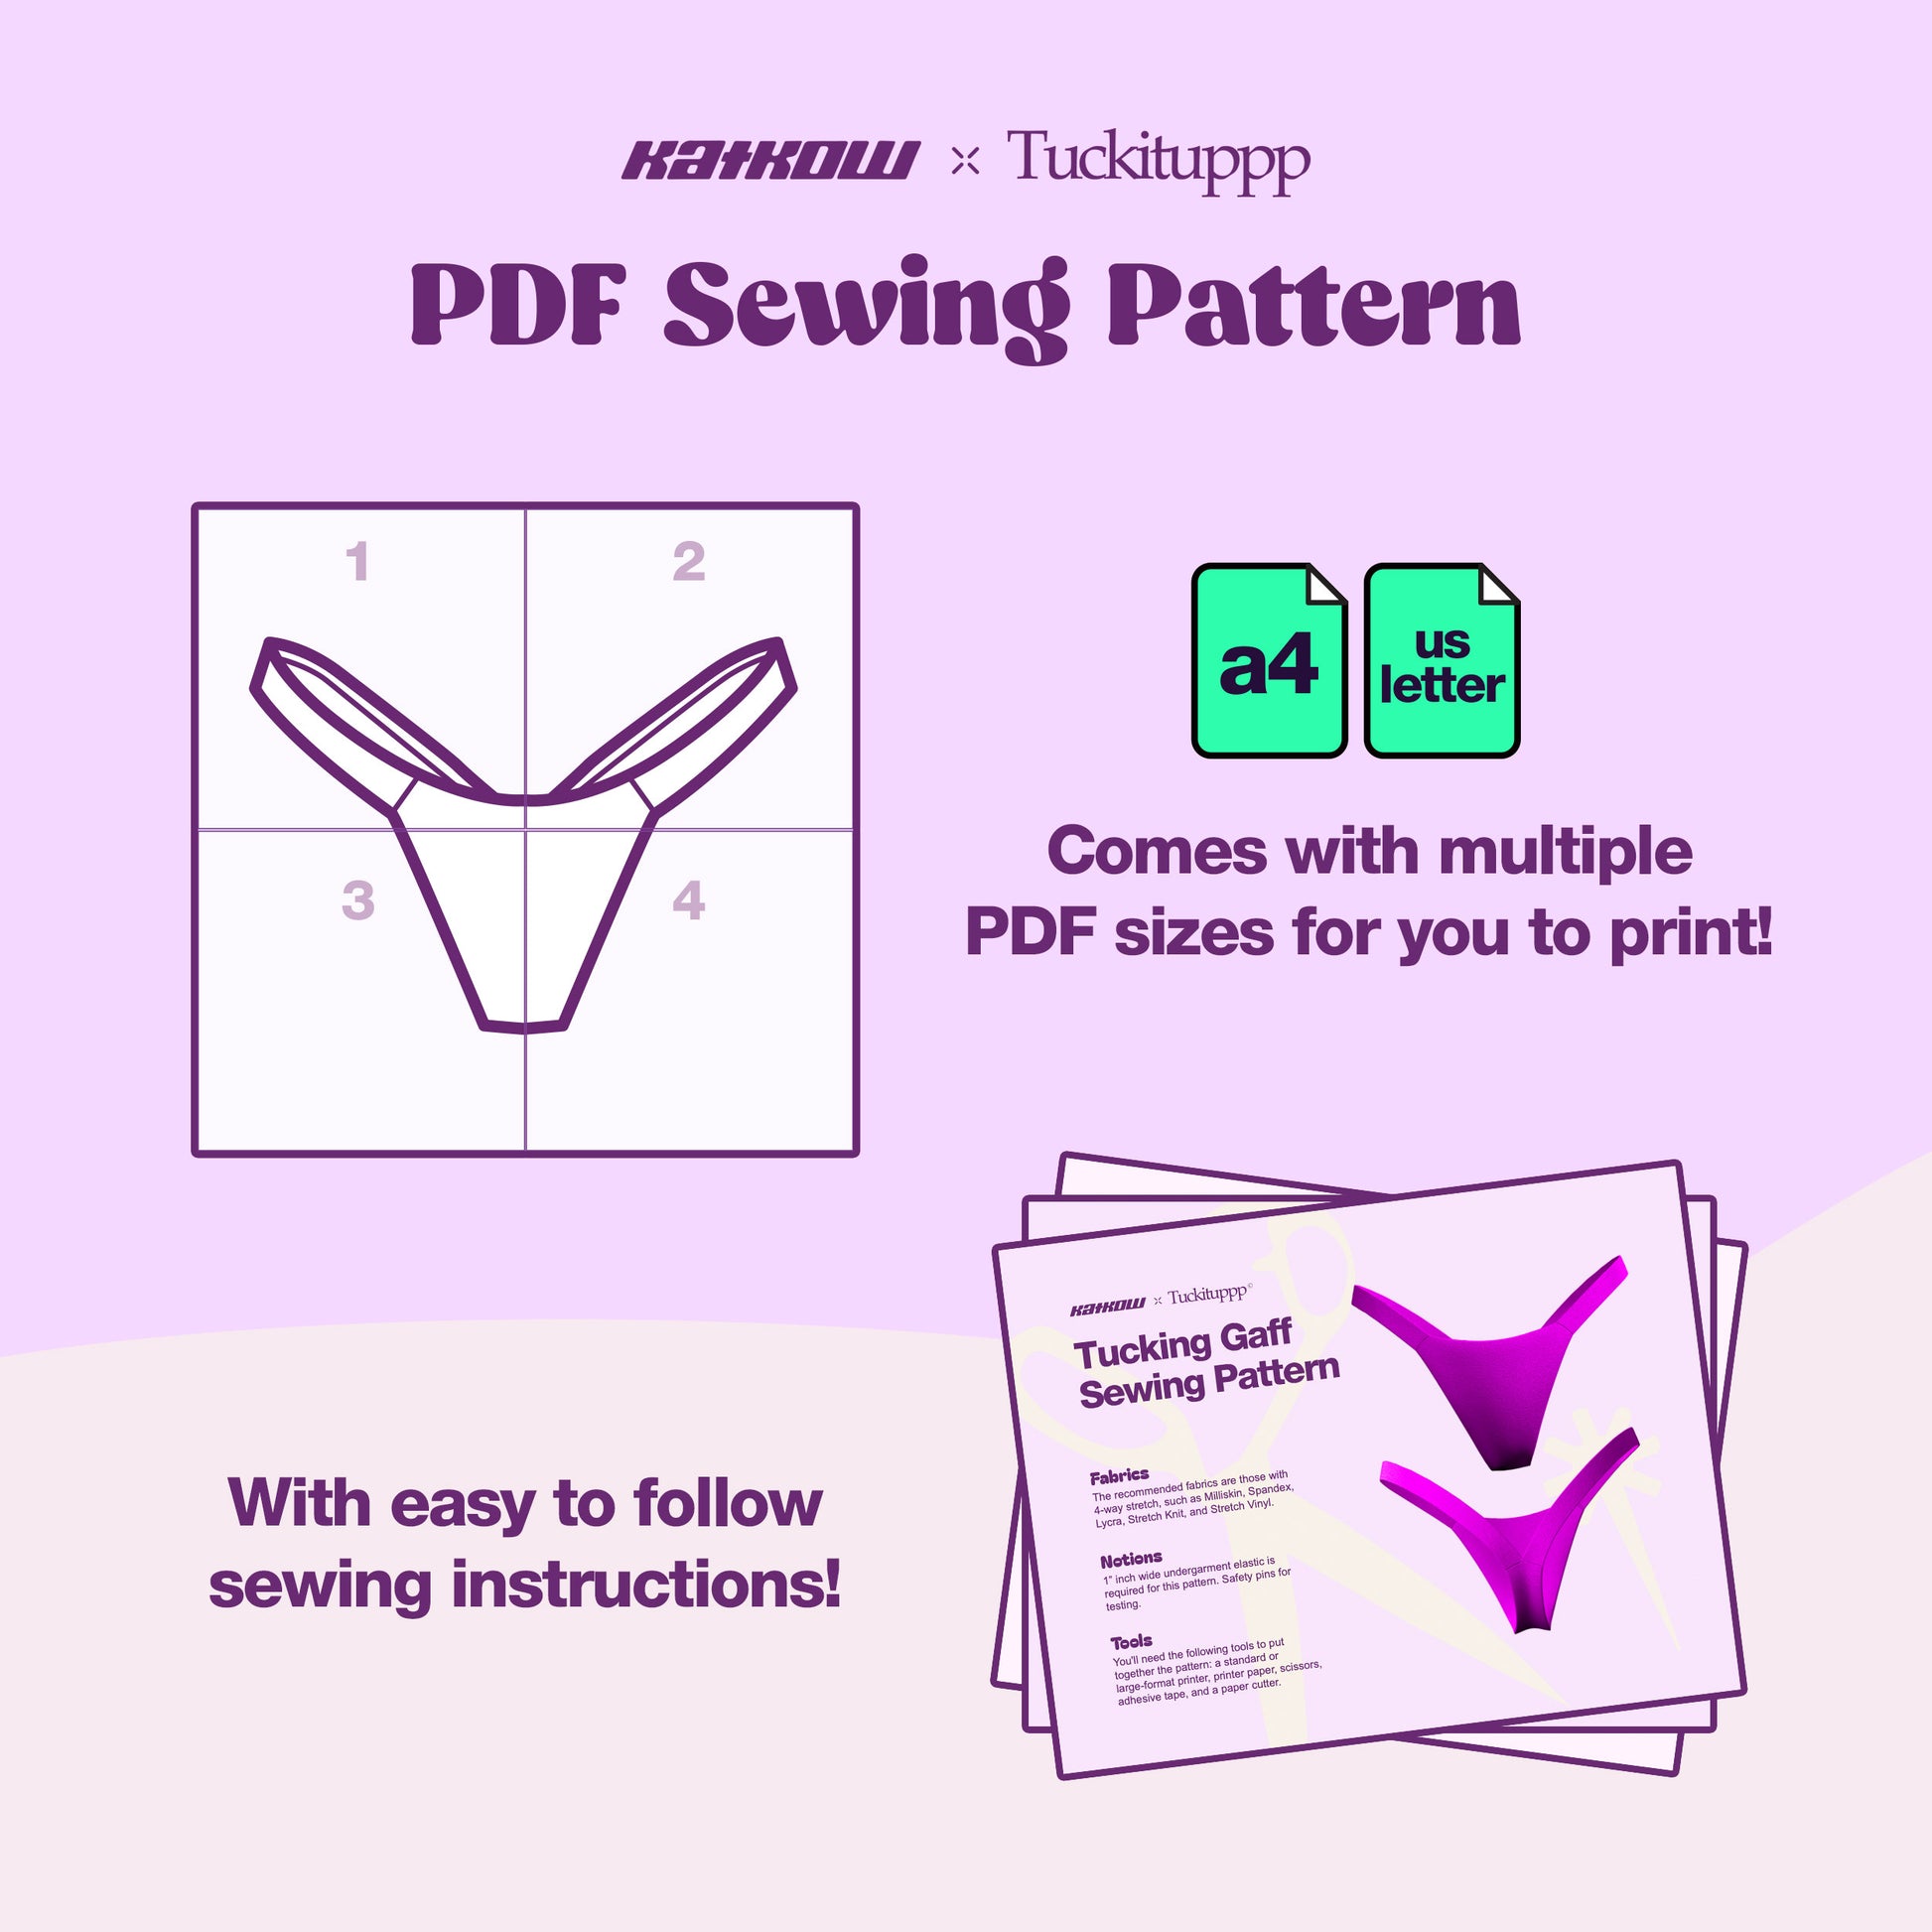 Katkow and Tuckituppp Collaboration Tucking Gaff Sewing Pattern Undergarment Thong Drag Queen Transgender Costume Mens Lingerie Plus Size Cosplay PDF